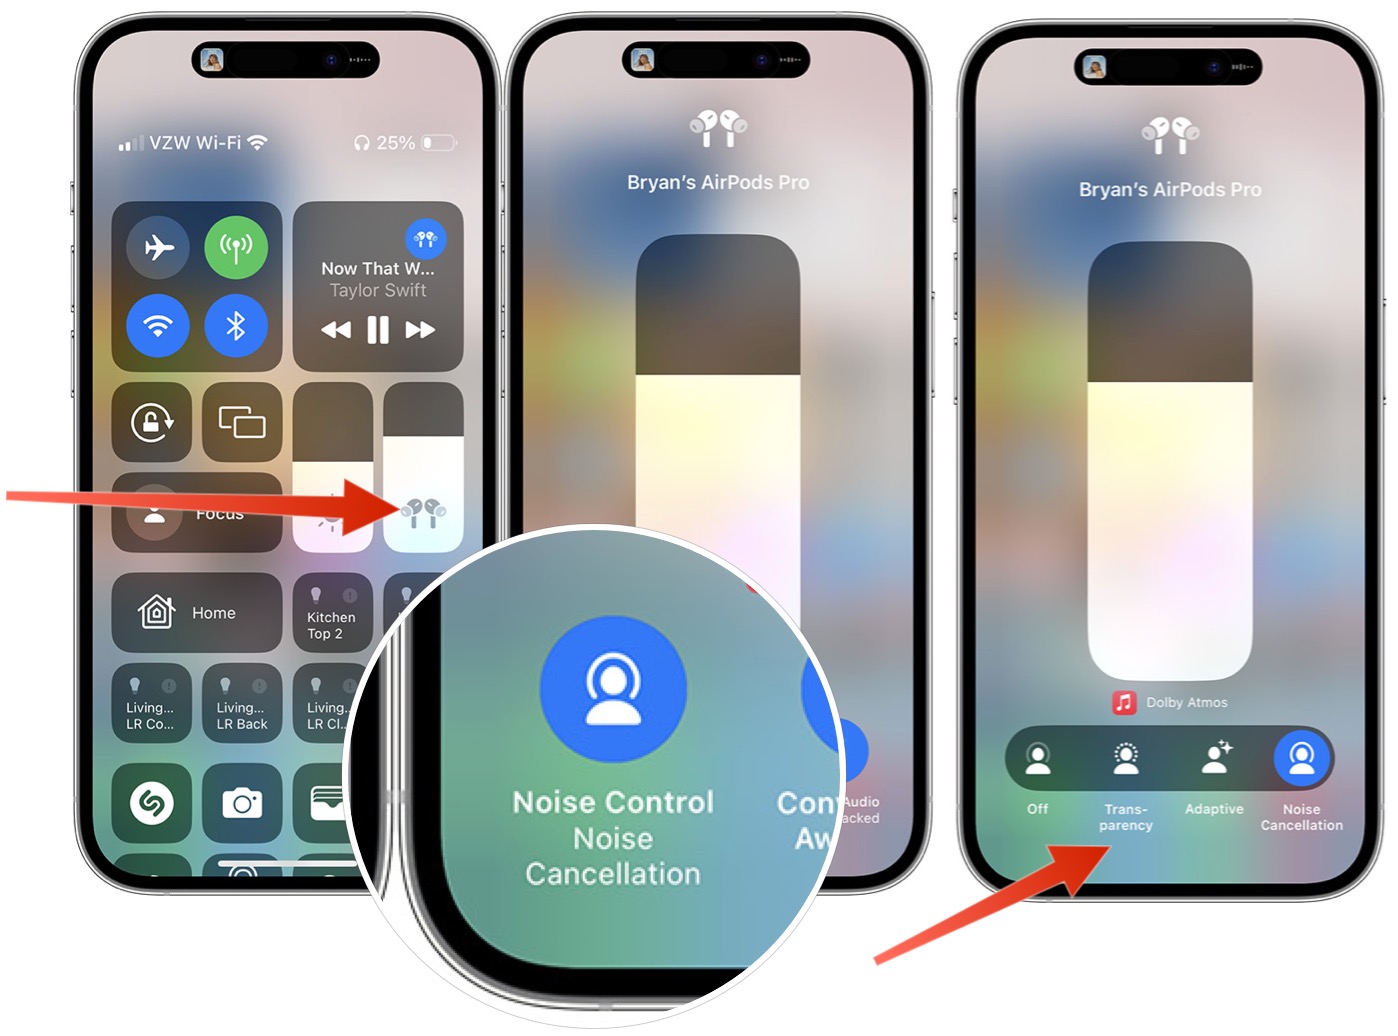 Screenshots showing noise control for AirPods on iPhone.